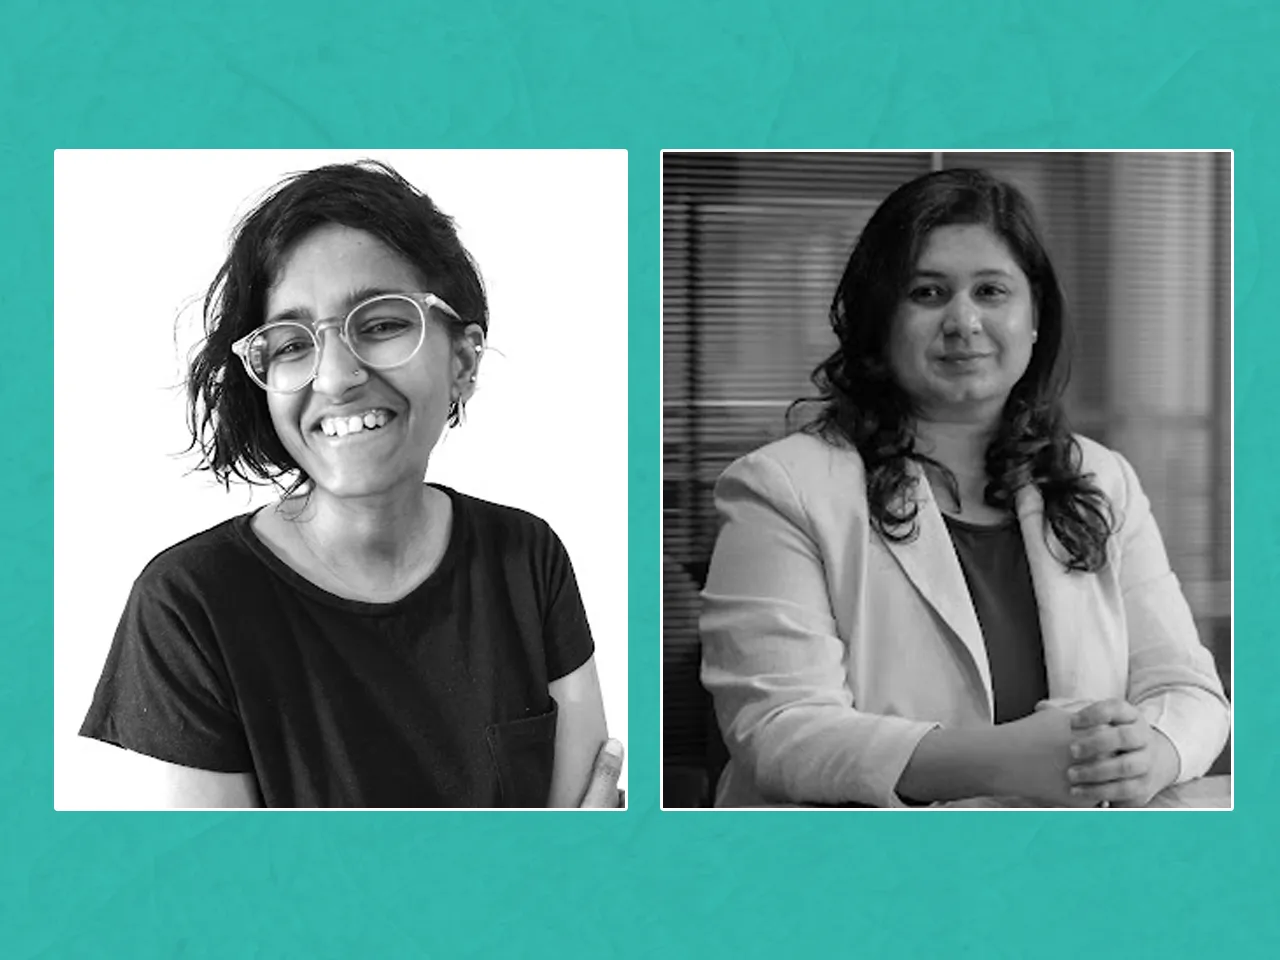 Curativity expands its leadership team with the appointments of Aarti Srinivasan and Neha Dhanani